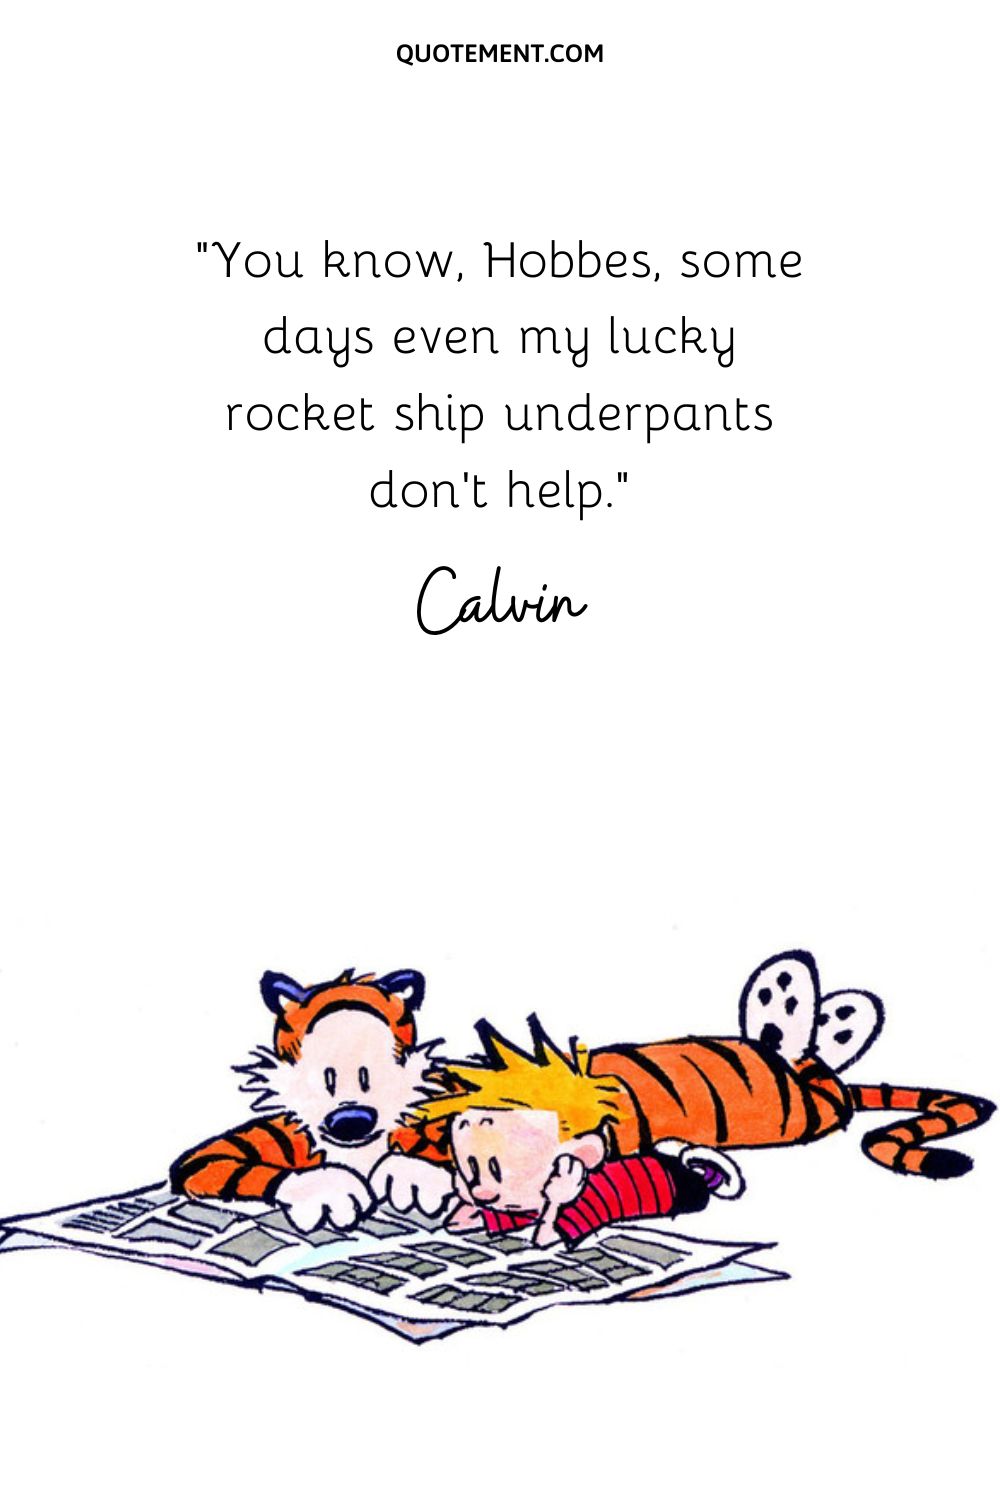 You know, Hobbes, some days even my lucky rocket ship underpants don’t help.